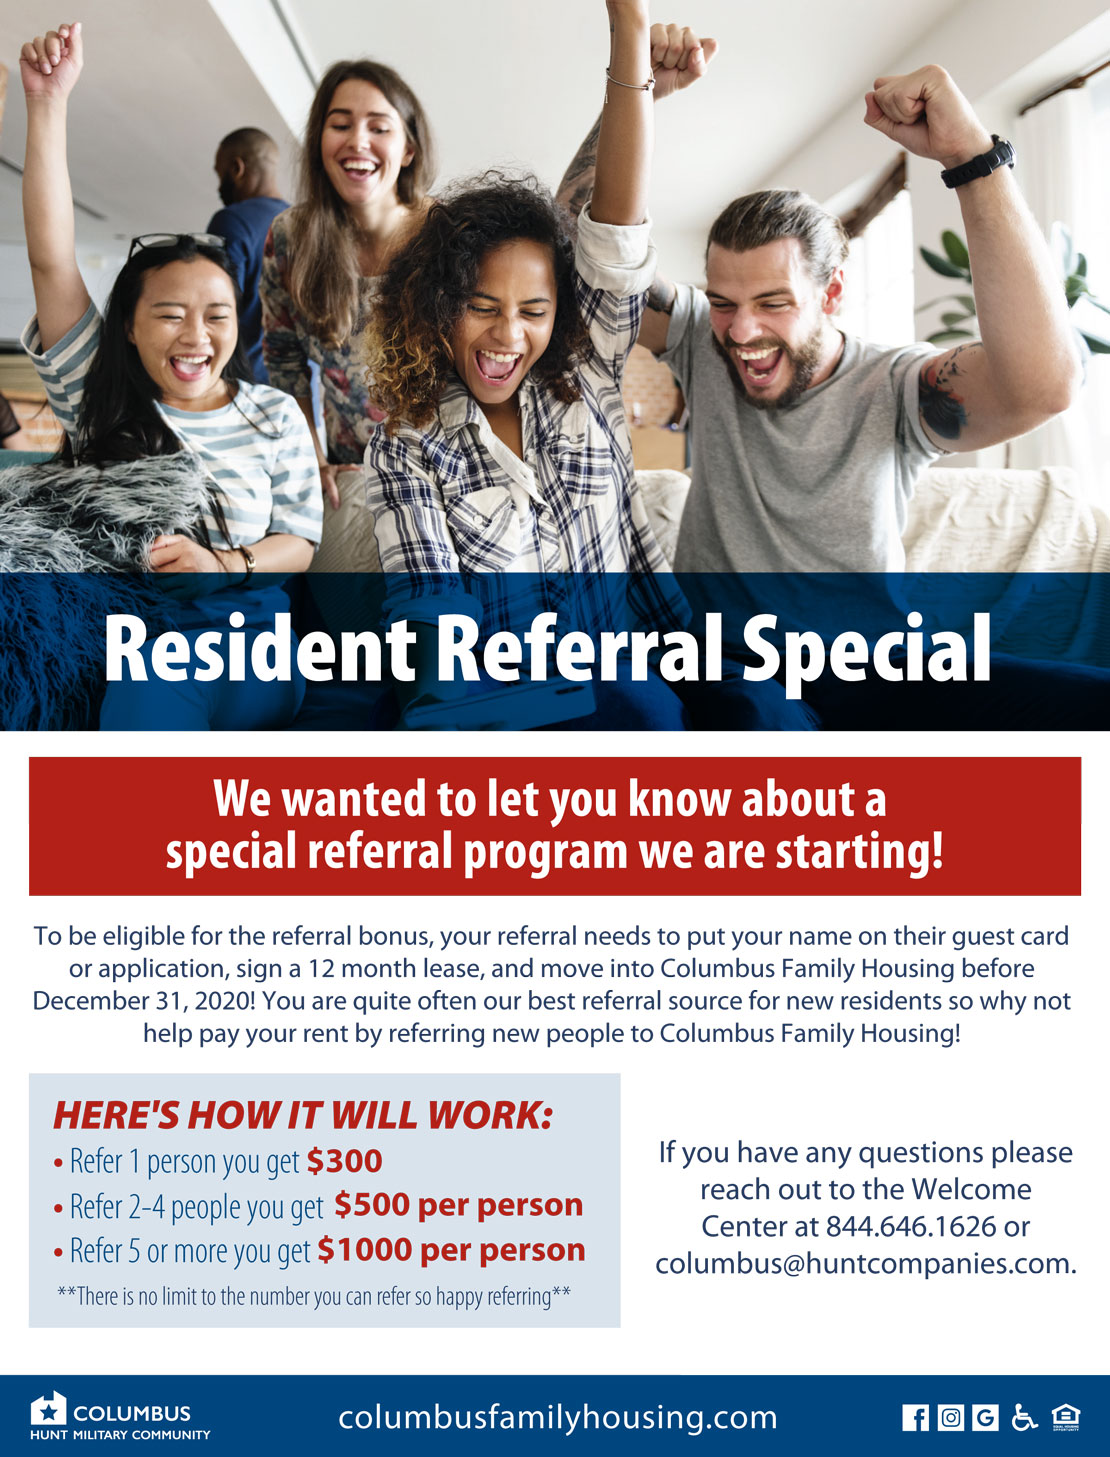 Resident can qualify for a referral bonus